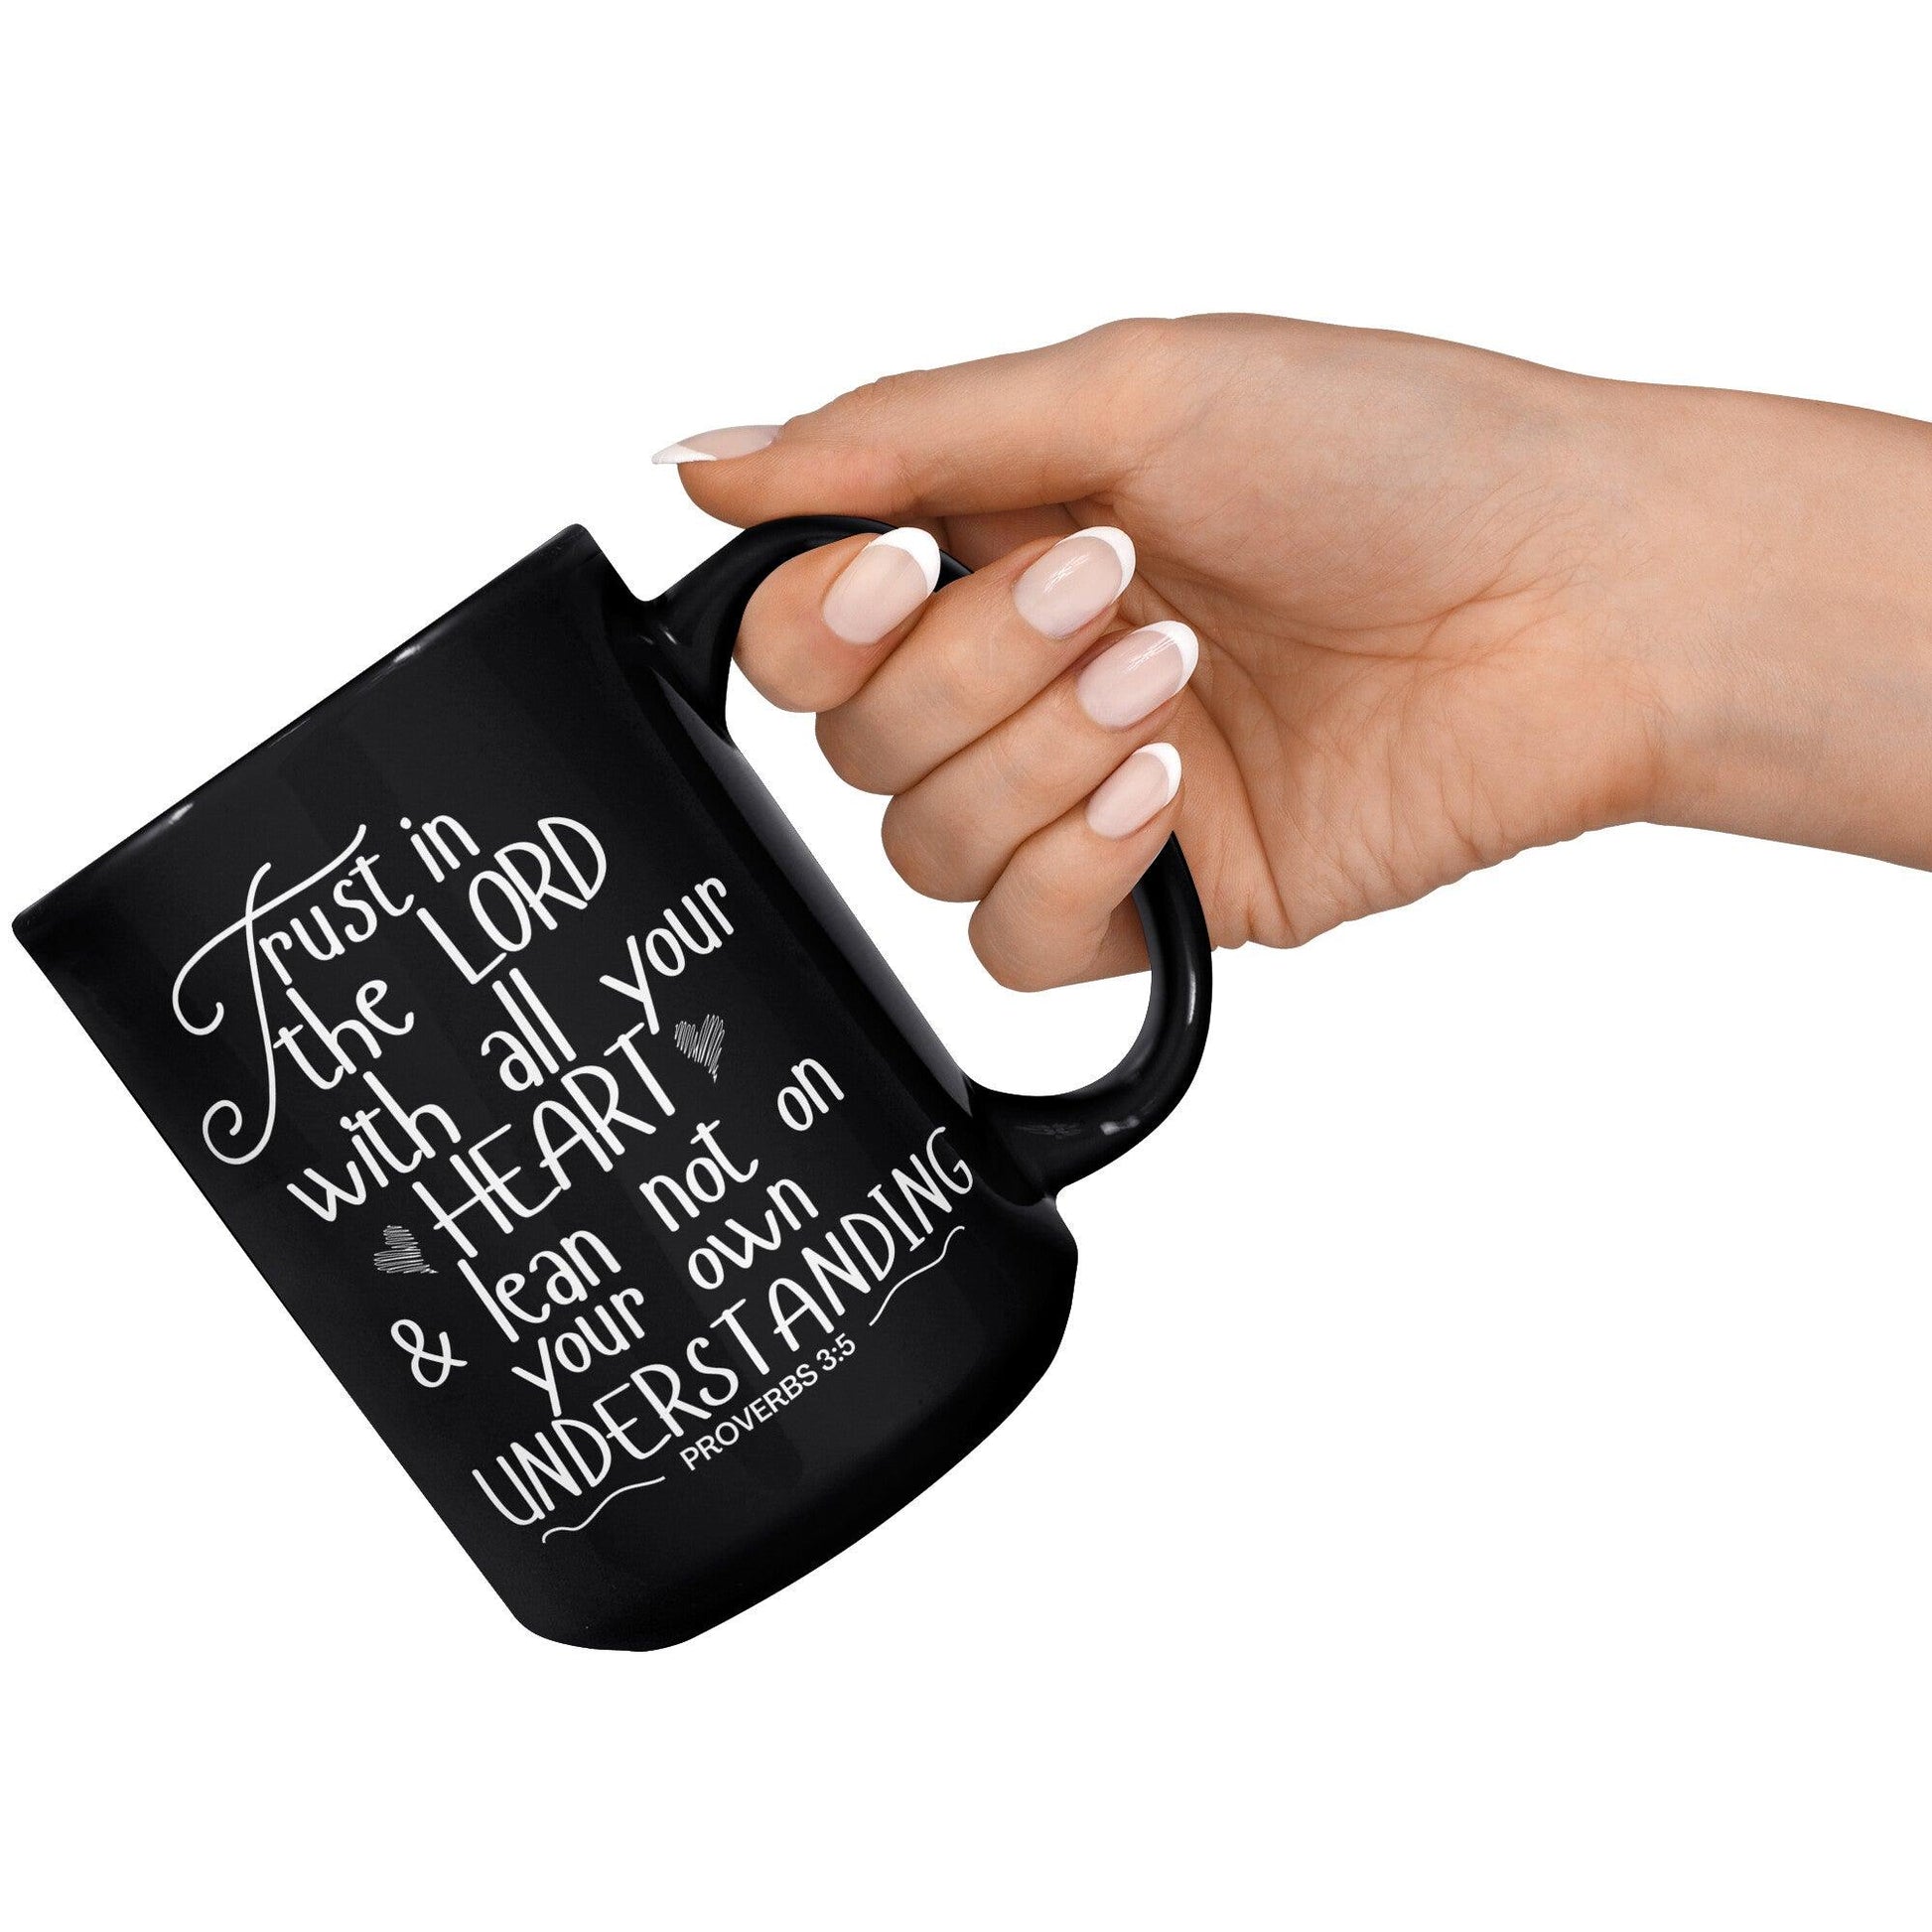 Trust in the LORD with all your Heart and Lean not on your Own Understanding • Proverbs 3:5 Black Mug - TheGivenGet